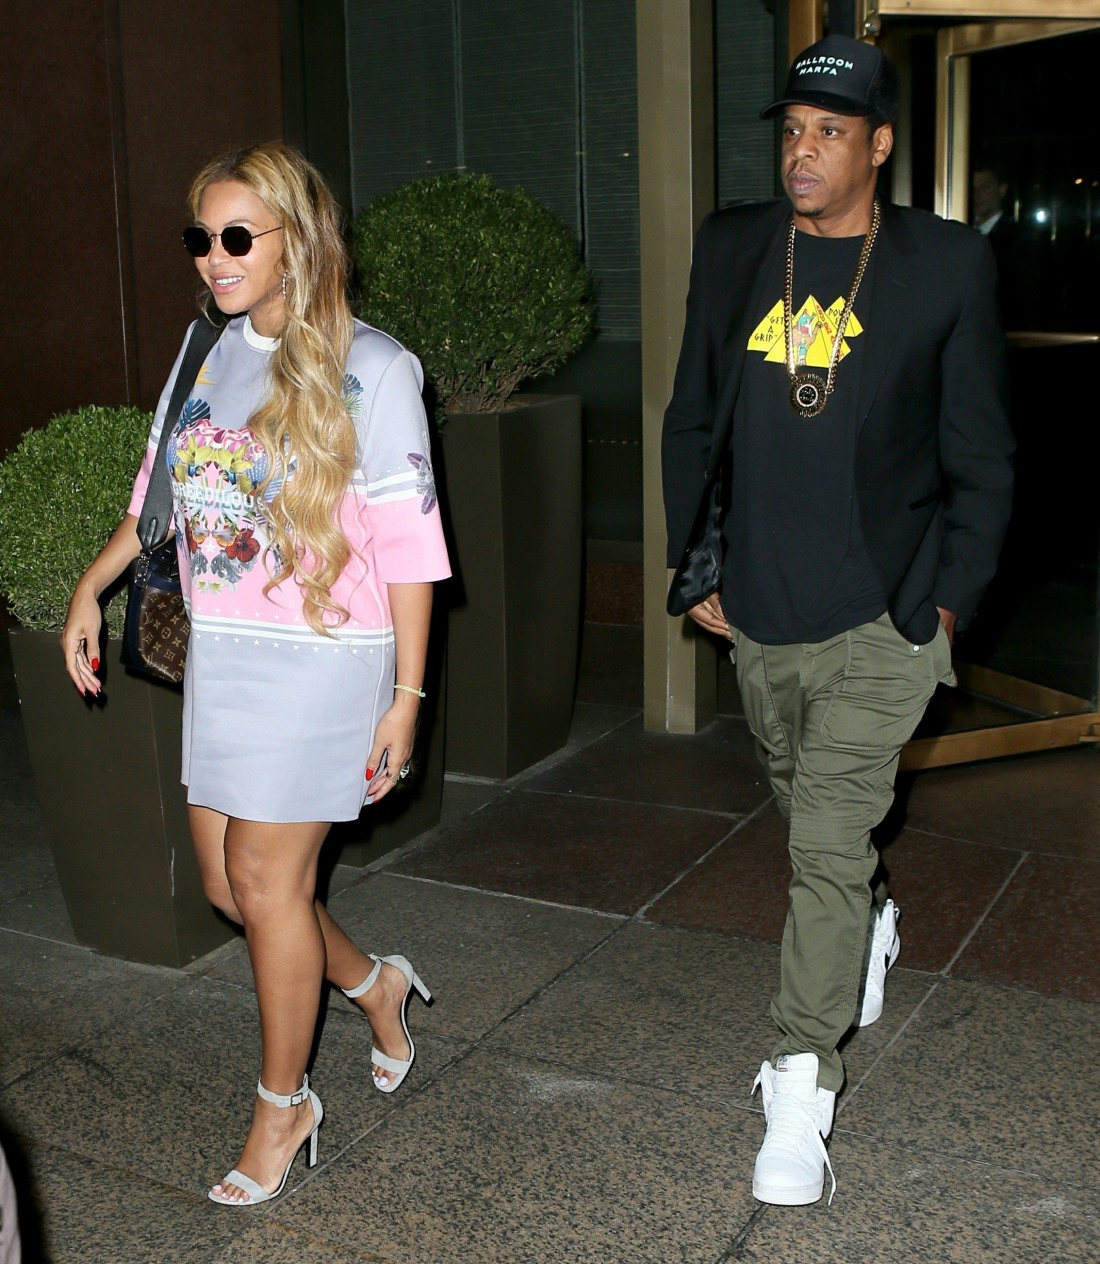 Beyonce and Jay Z head to Radio City Music Hall for Solange's concert